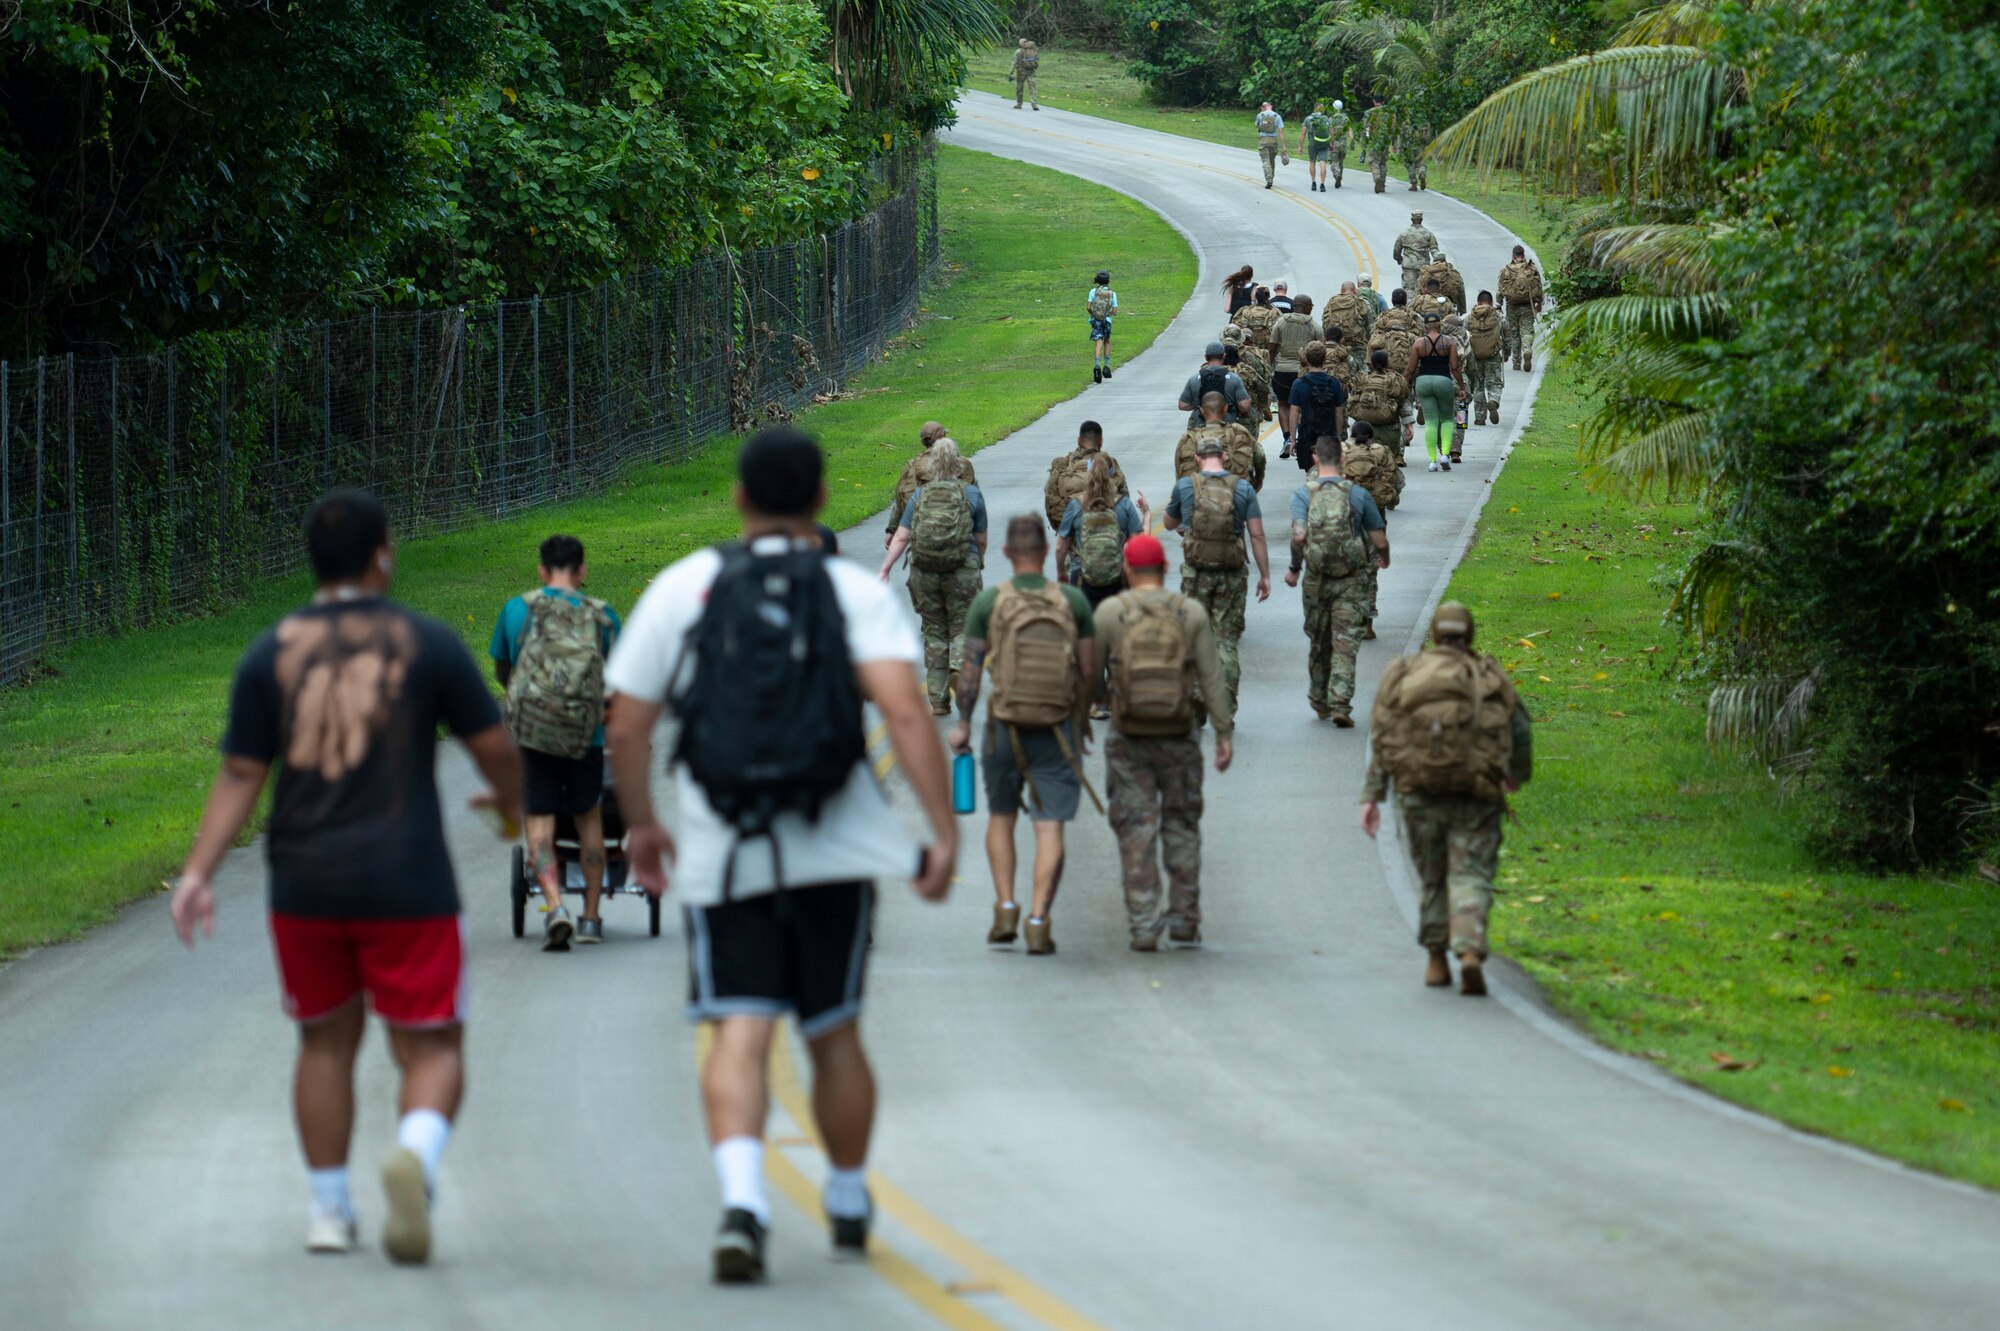 U.S. Air Force service members and their families walk from Tarague beach to Sanders Slope during the Office of Special Investigations’ Hustler-6 memorial event on Andersen Air Force Base, Guam, Dec. 21, 2022. Since 2016, OSI agents assigned to Andersen AFB have annually honored the Hustler-6, who lost their lives during a mission near Bagram, Afghanistan on Dec. 21, 2015, by rucking up and down Sanders Slope. (U.S. Air Force photo by Airman Spencer Perkins)